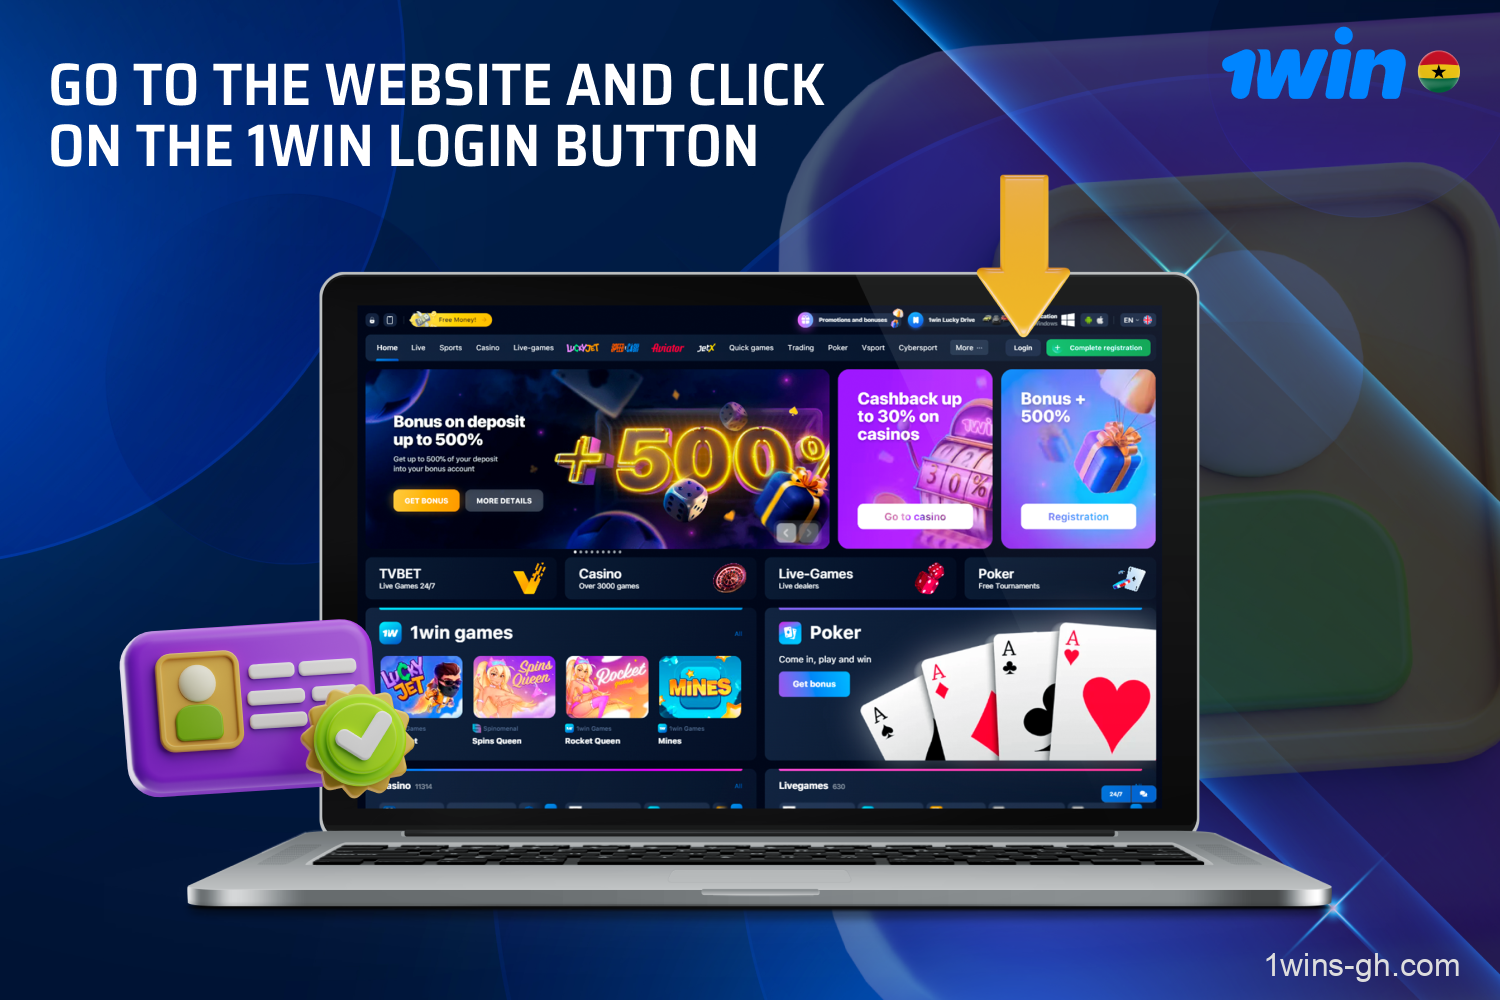 To log in to 1win users from Ghana must visit the site and click on the login button